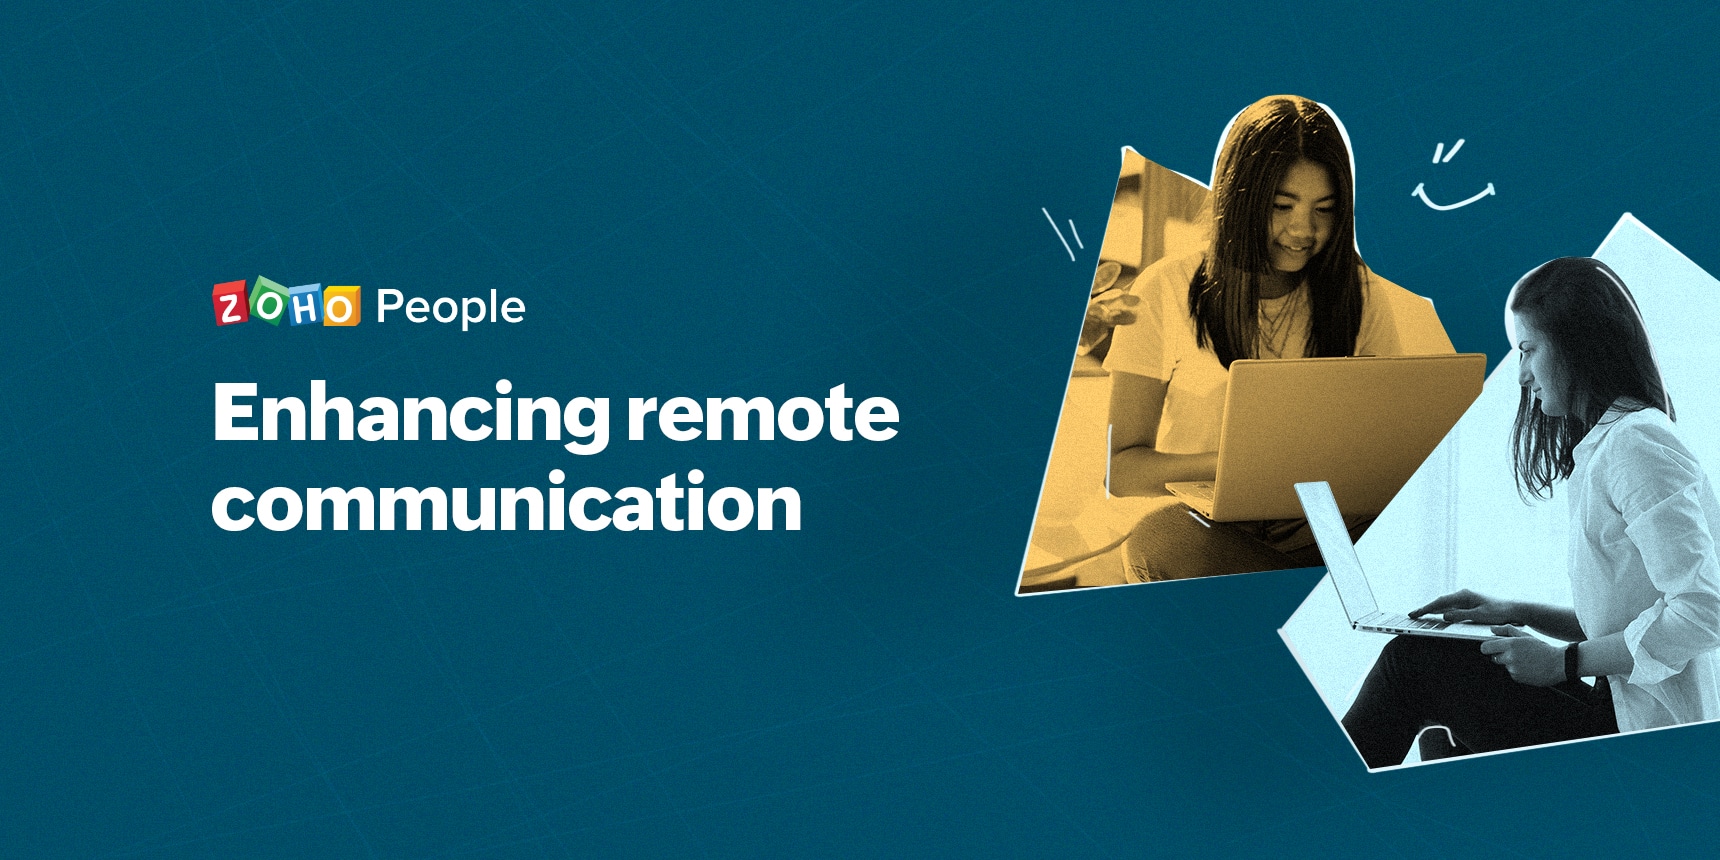 Remote Communication and collaboration